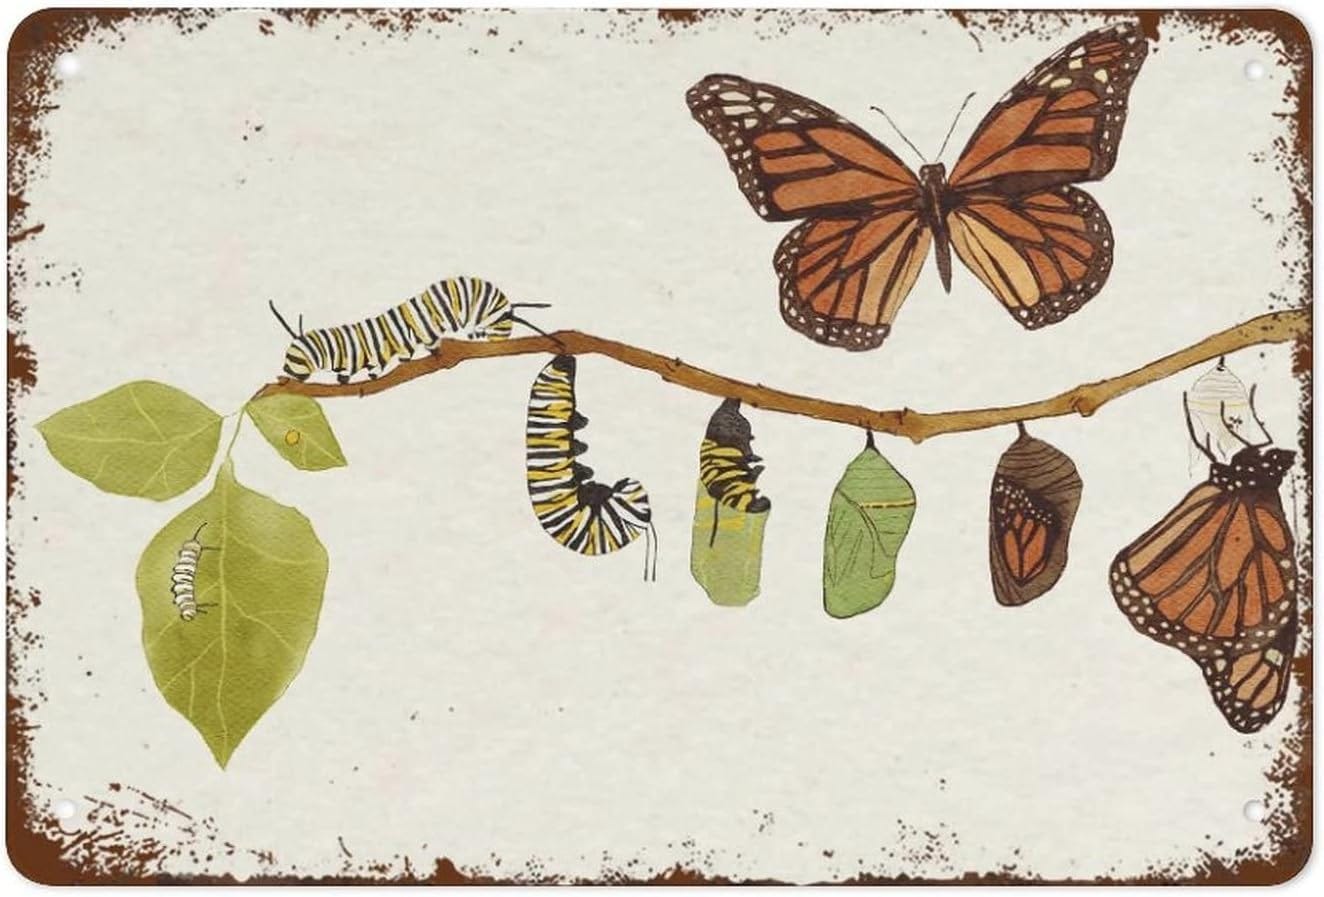 Monarch Butterfly Life Cycle Poster - Nature Watercolor Wall Art Funny  Vintage Metal Tin Sign For Bedroom Living Room Kitchen Yard Garden Wall  Decor ...